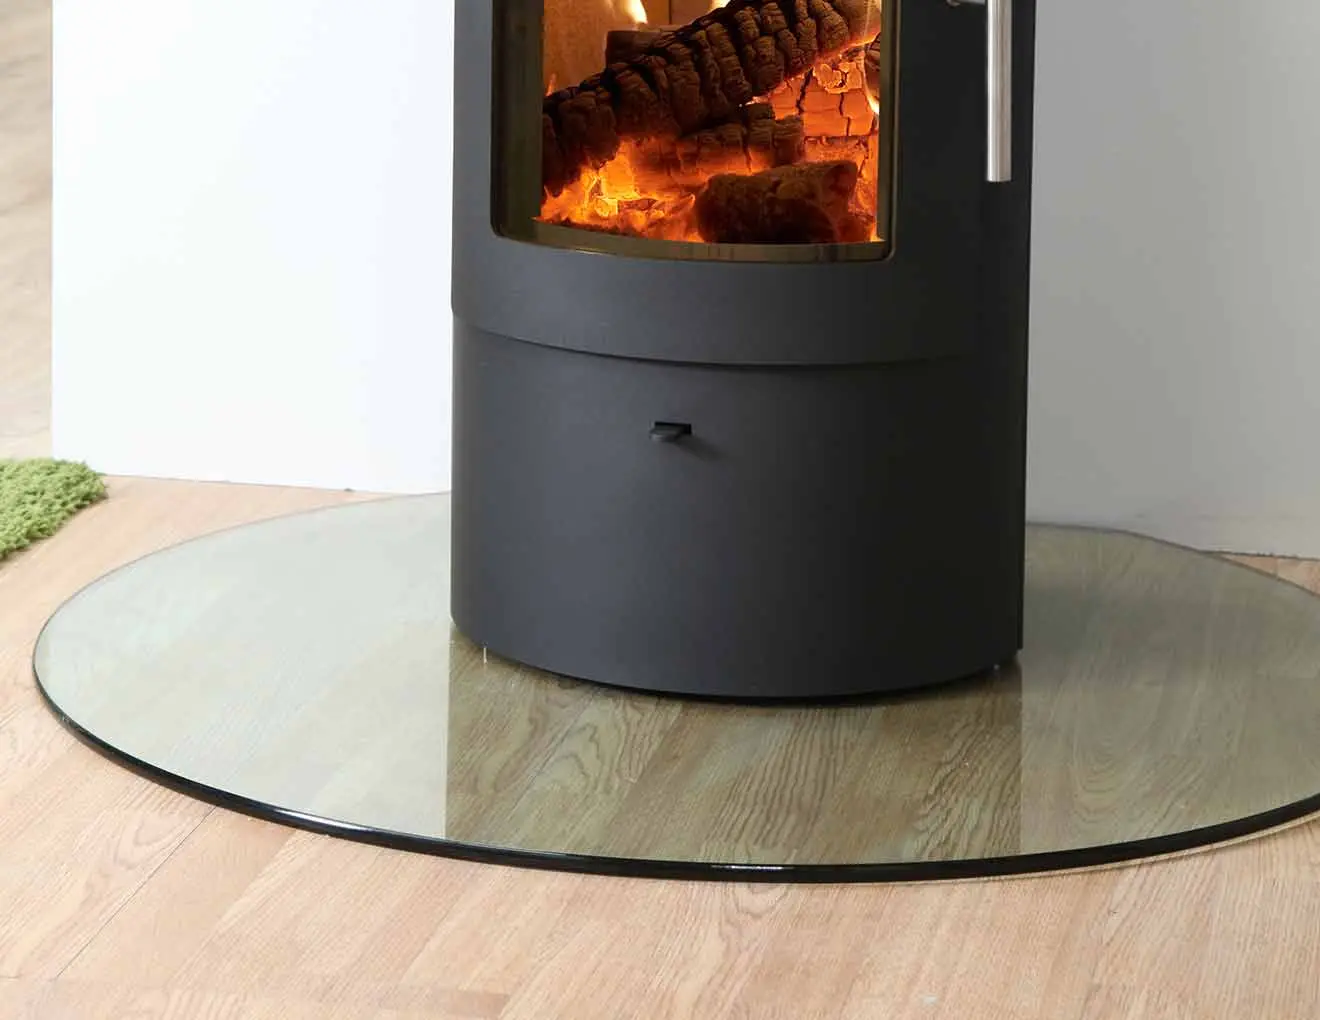 smoked glass hearth - Can a hearth be made of glass